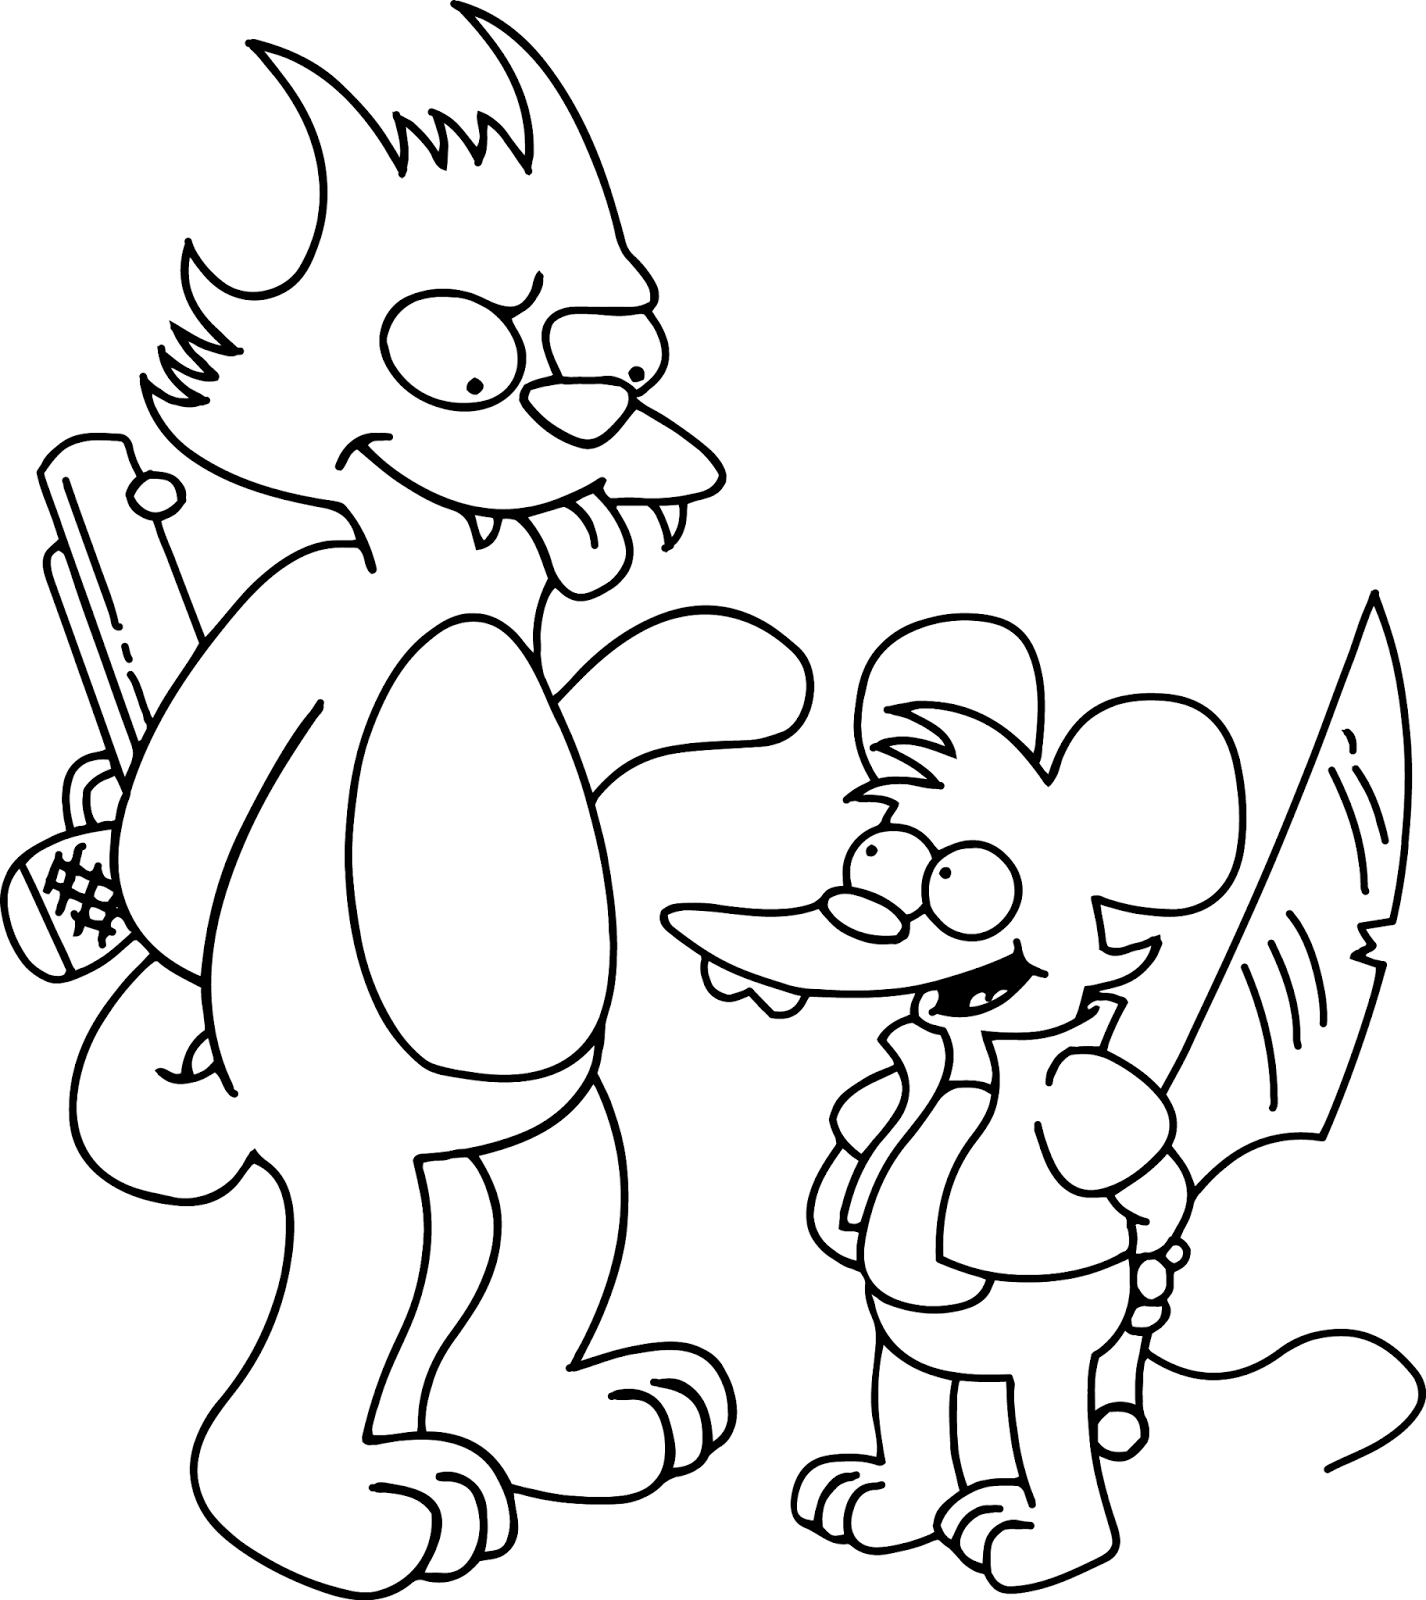 Simpsons Coloring Pages at Free printable colorings